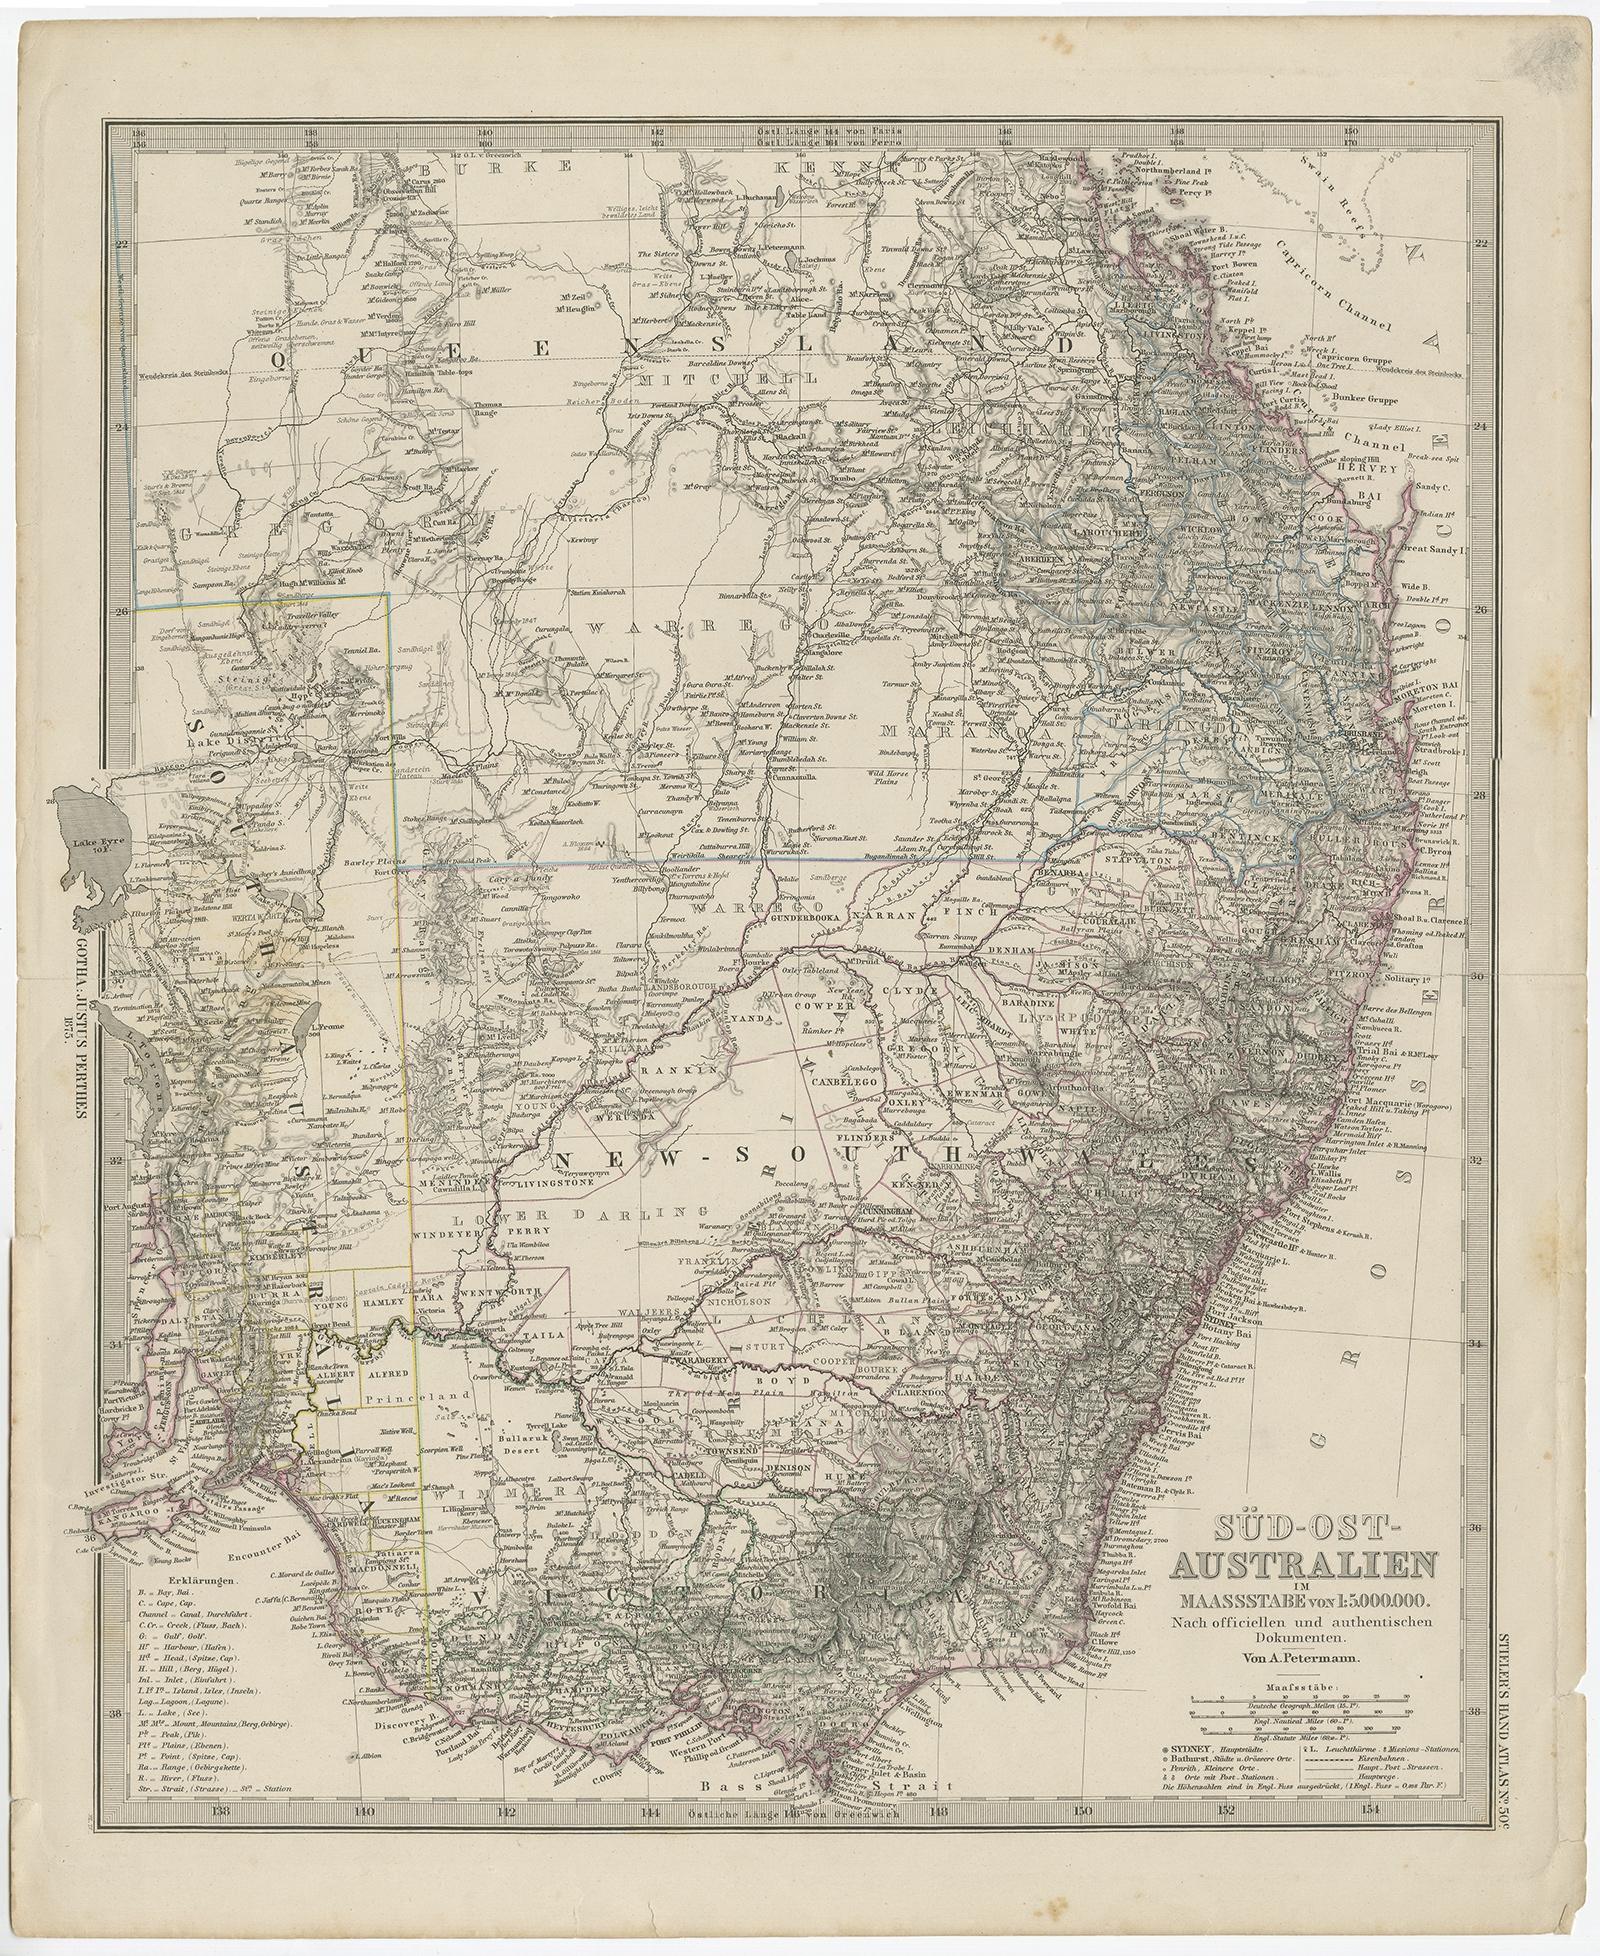 Antique map Australia titled 'Süd-Ost Australien'. 

Detailed map of South East Australia. Orginates from 'Stieler's Hand Atlas', published in Germany ca. 1848.

Artists and Engravers: A. Petermann, cartographer.

We sell original antique maps to